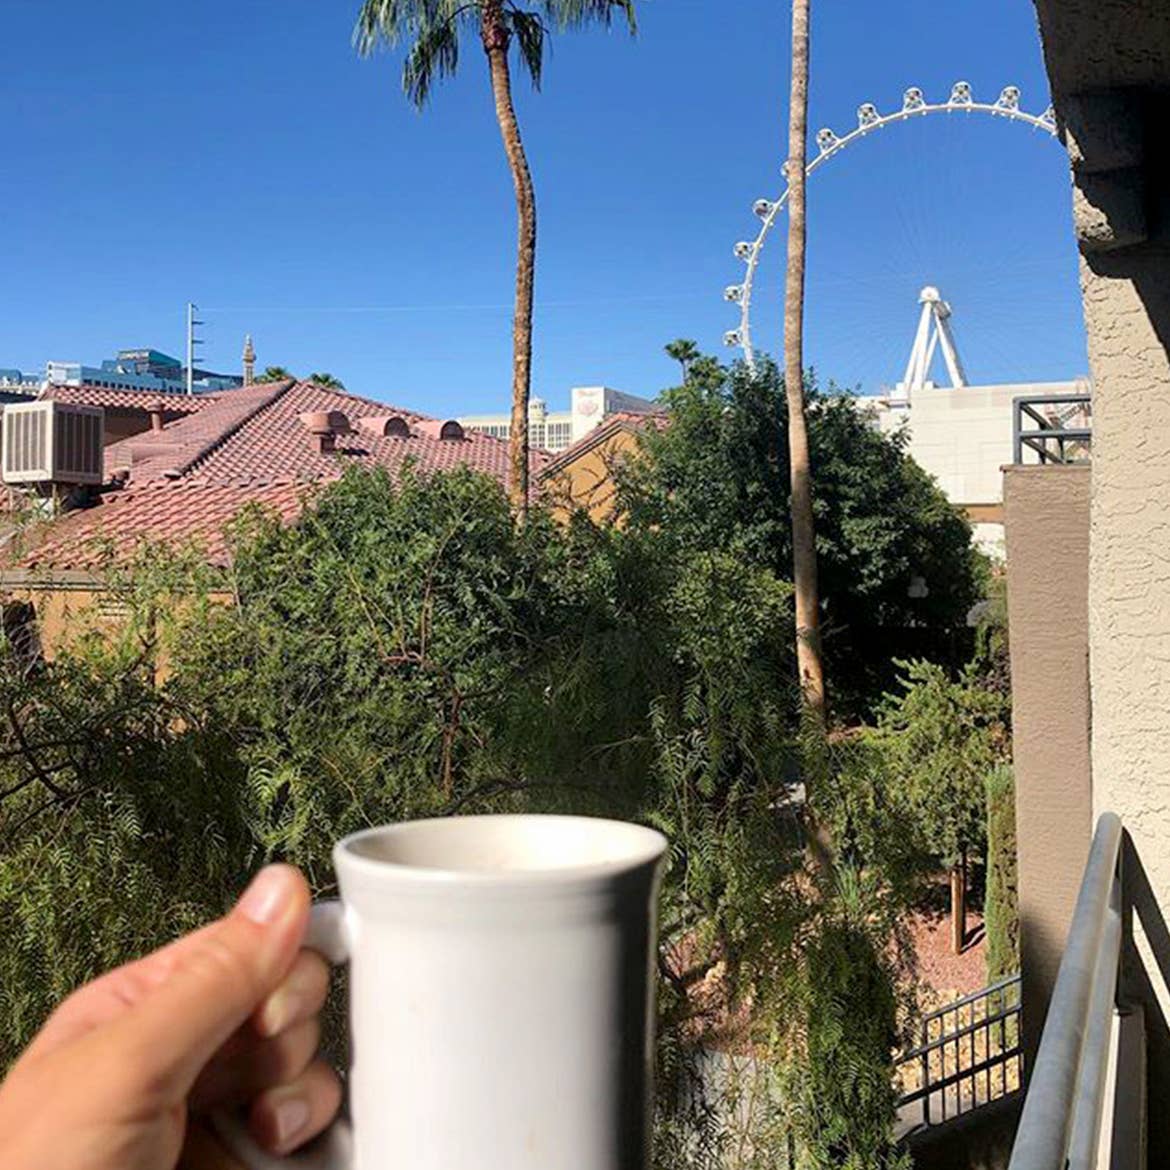 A guest holds a white coffee mug outside as a Ferris Wheel and palm trees are seen in front of a blue sky at our Desert Club Resort.